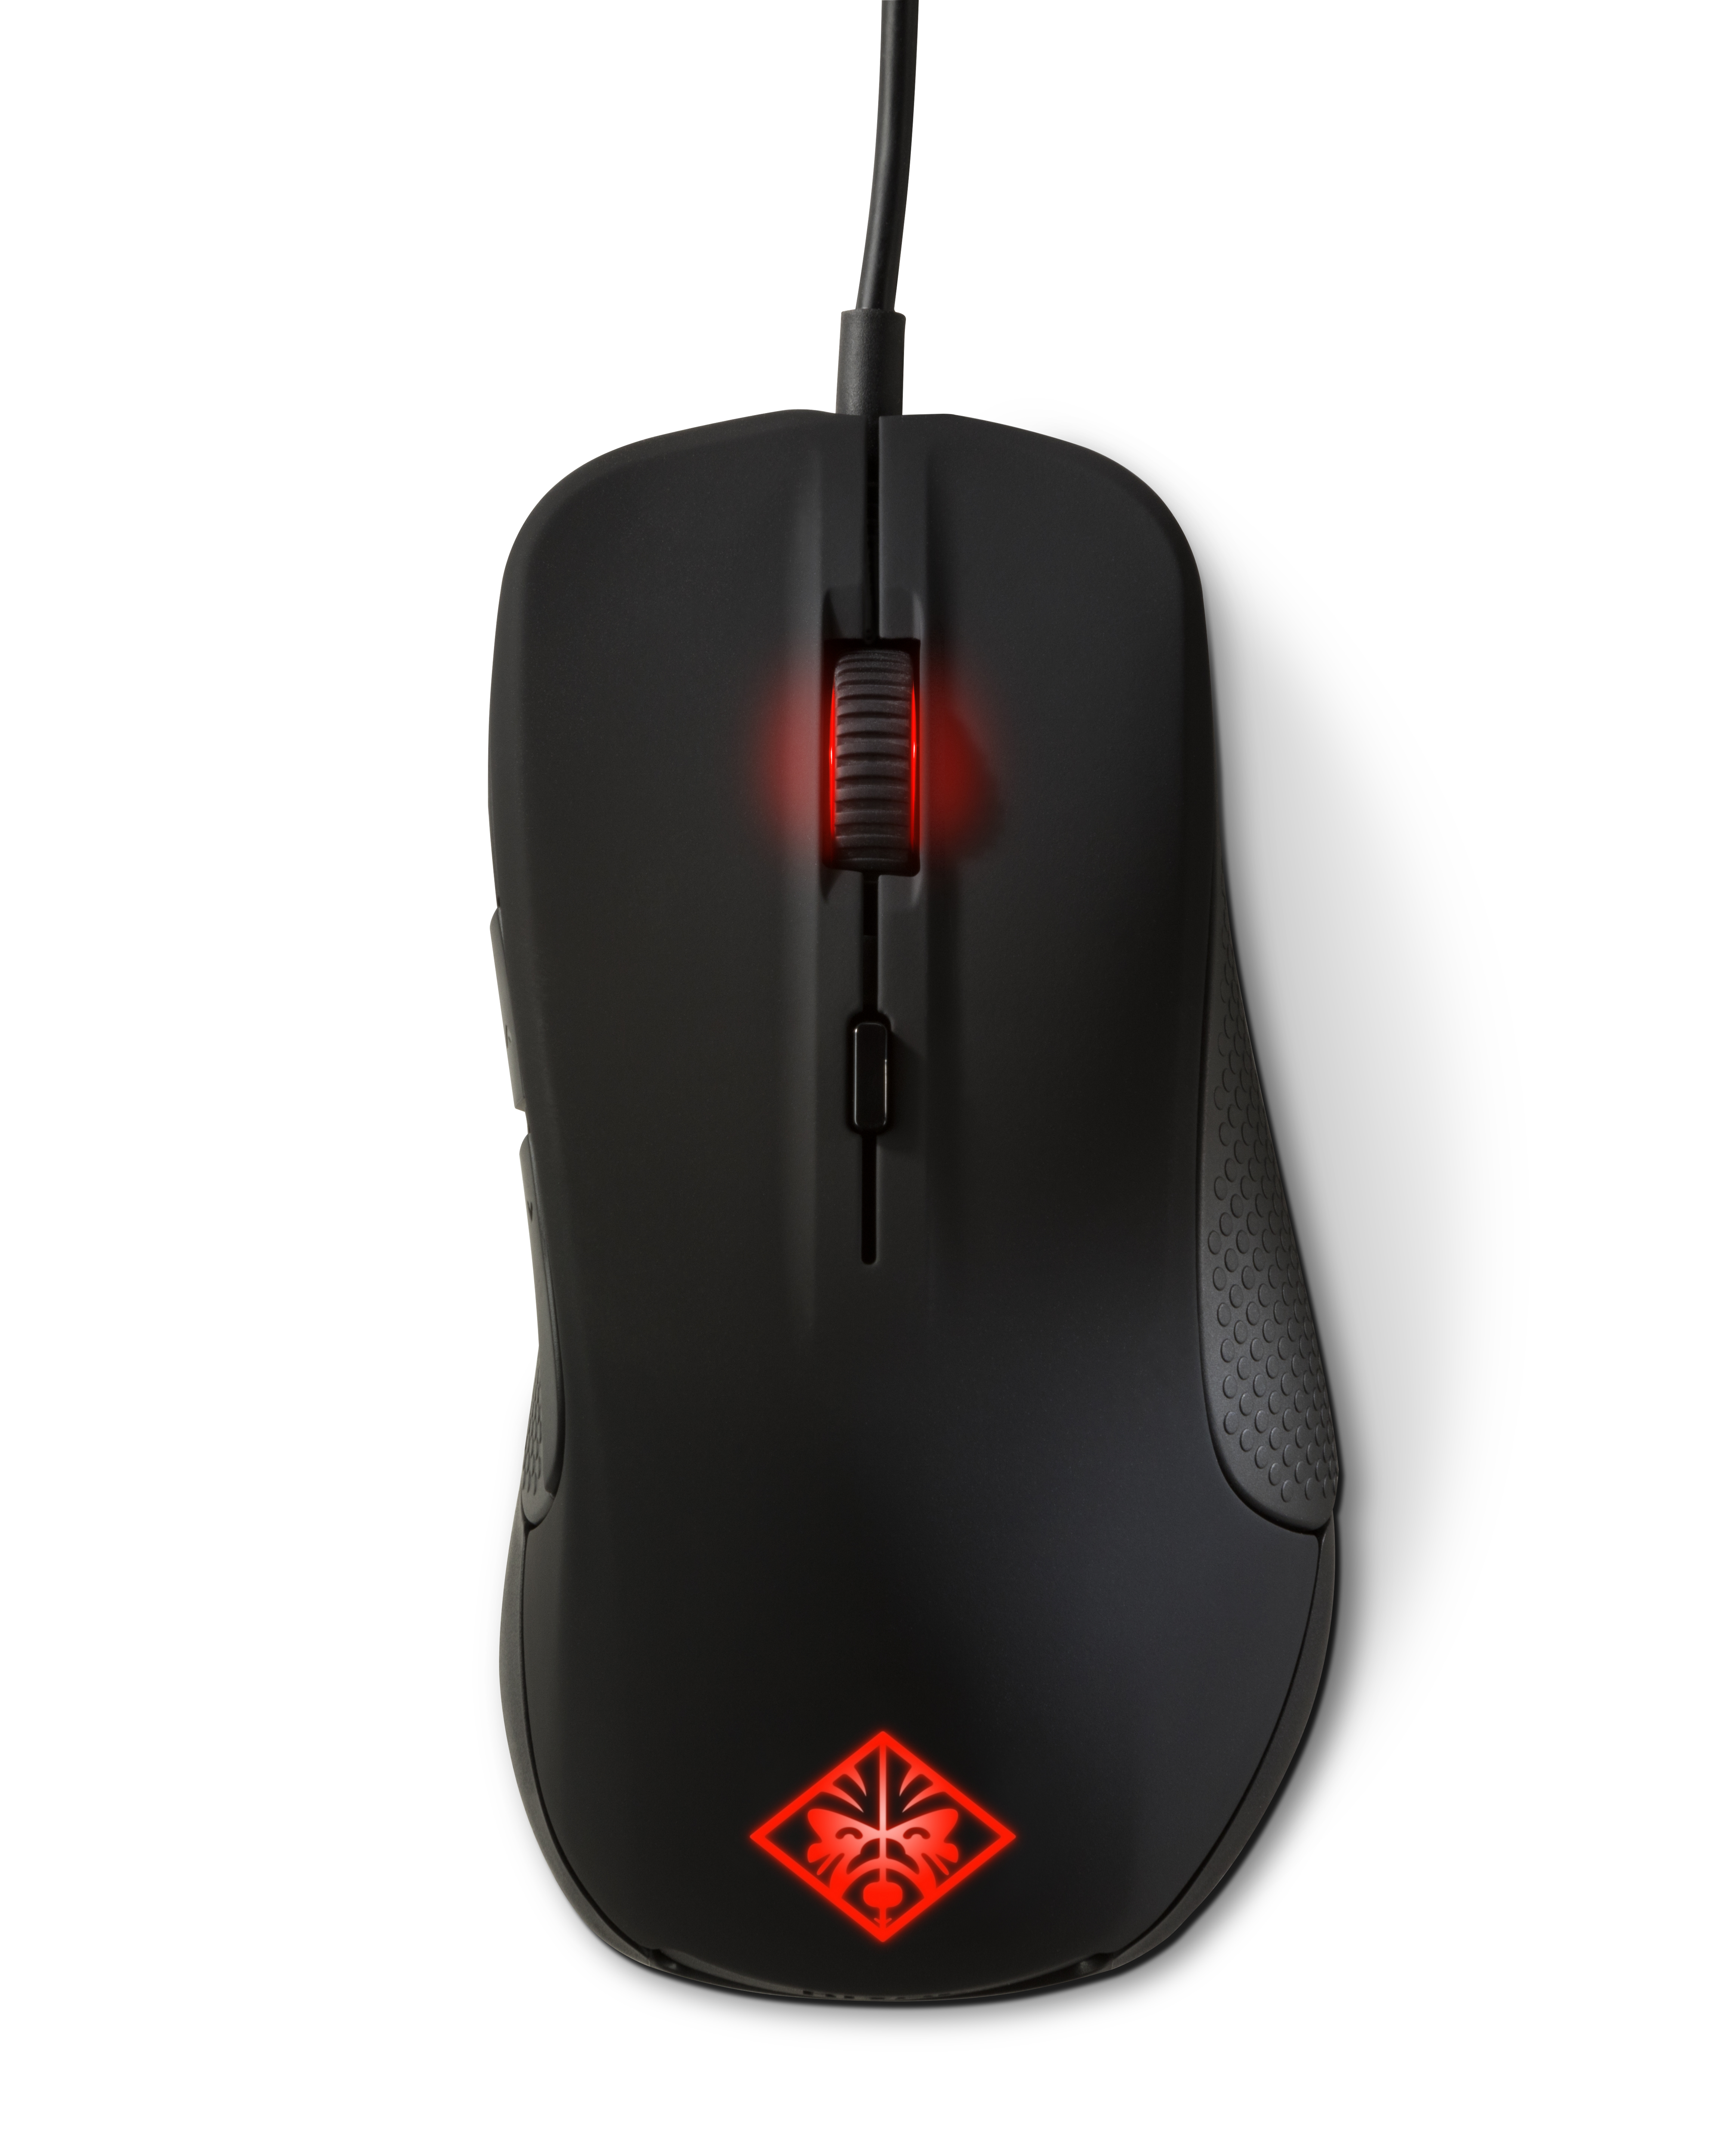 HP SteelSeries Rival 300 Gaming Mouse, Top View